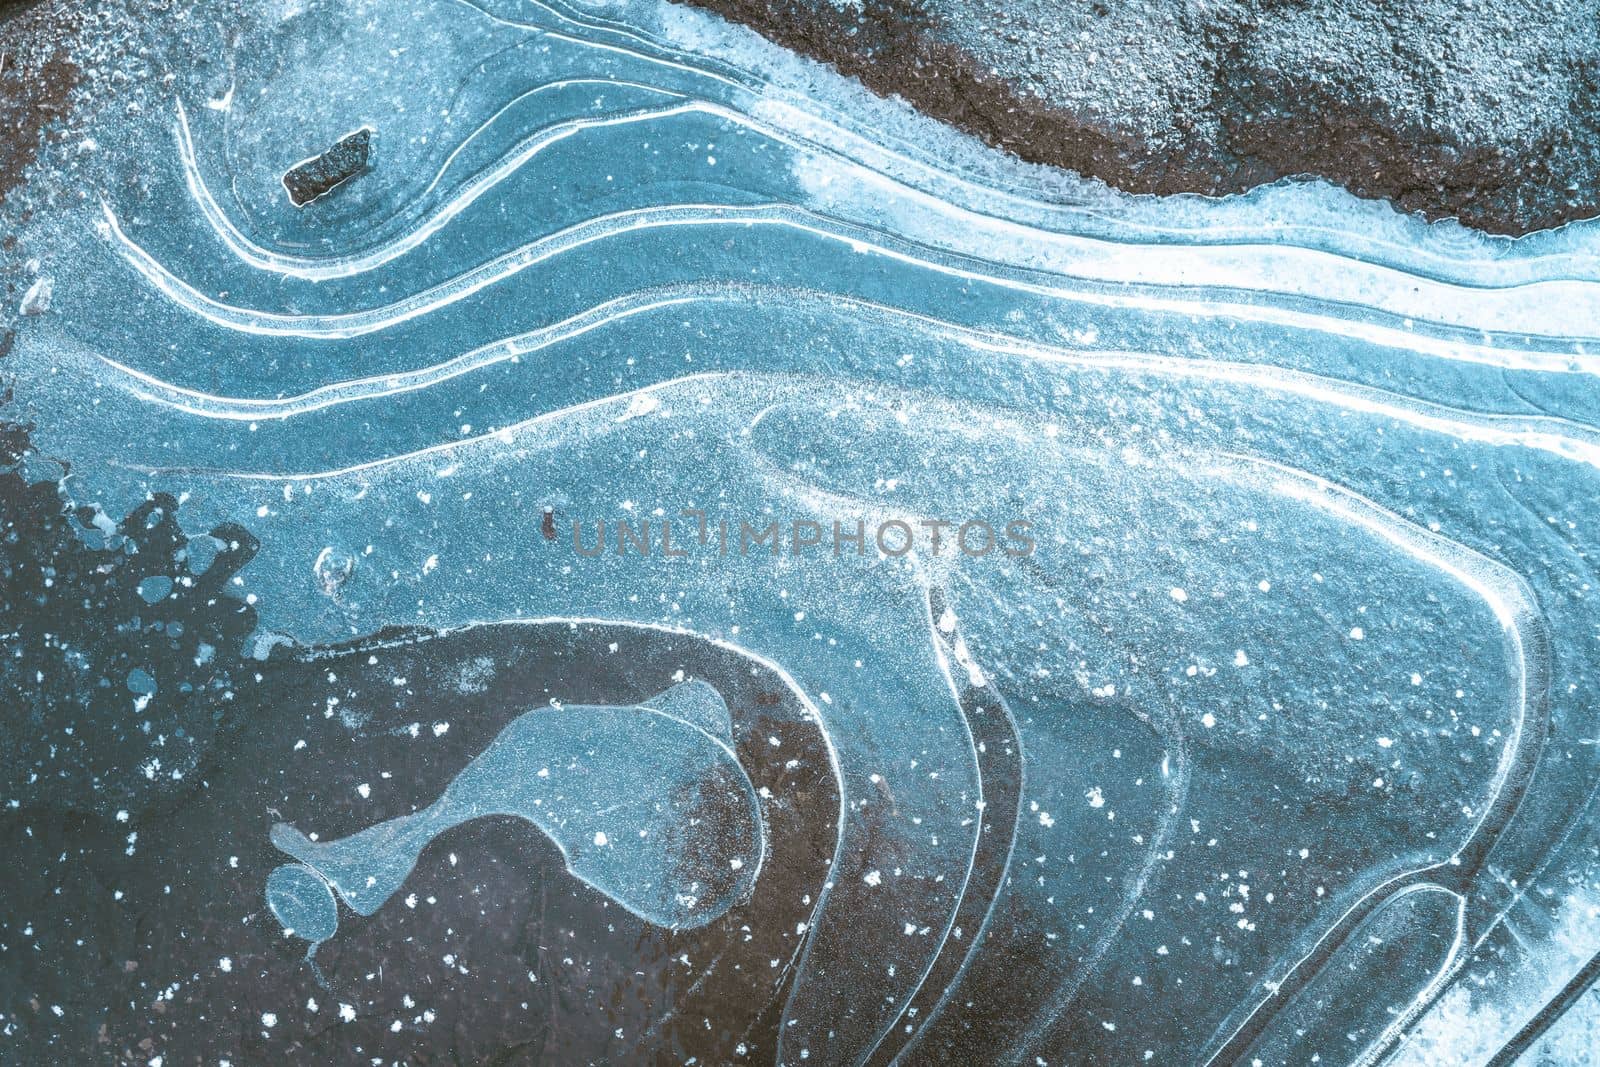 Blue ice formation with white curvy snow stripes and bulb-shaped ice formation that resembles whale. Minimalist design make this image perfect for backgrounds, wallpaper, or graphic design projects by LipikStockMedia